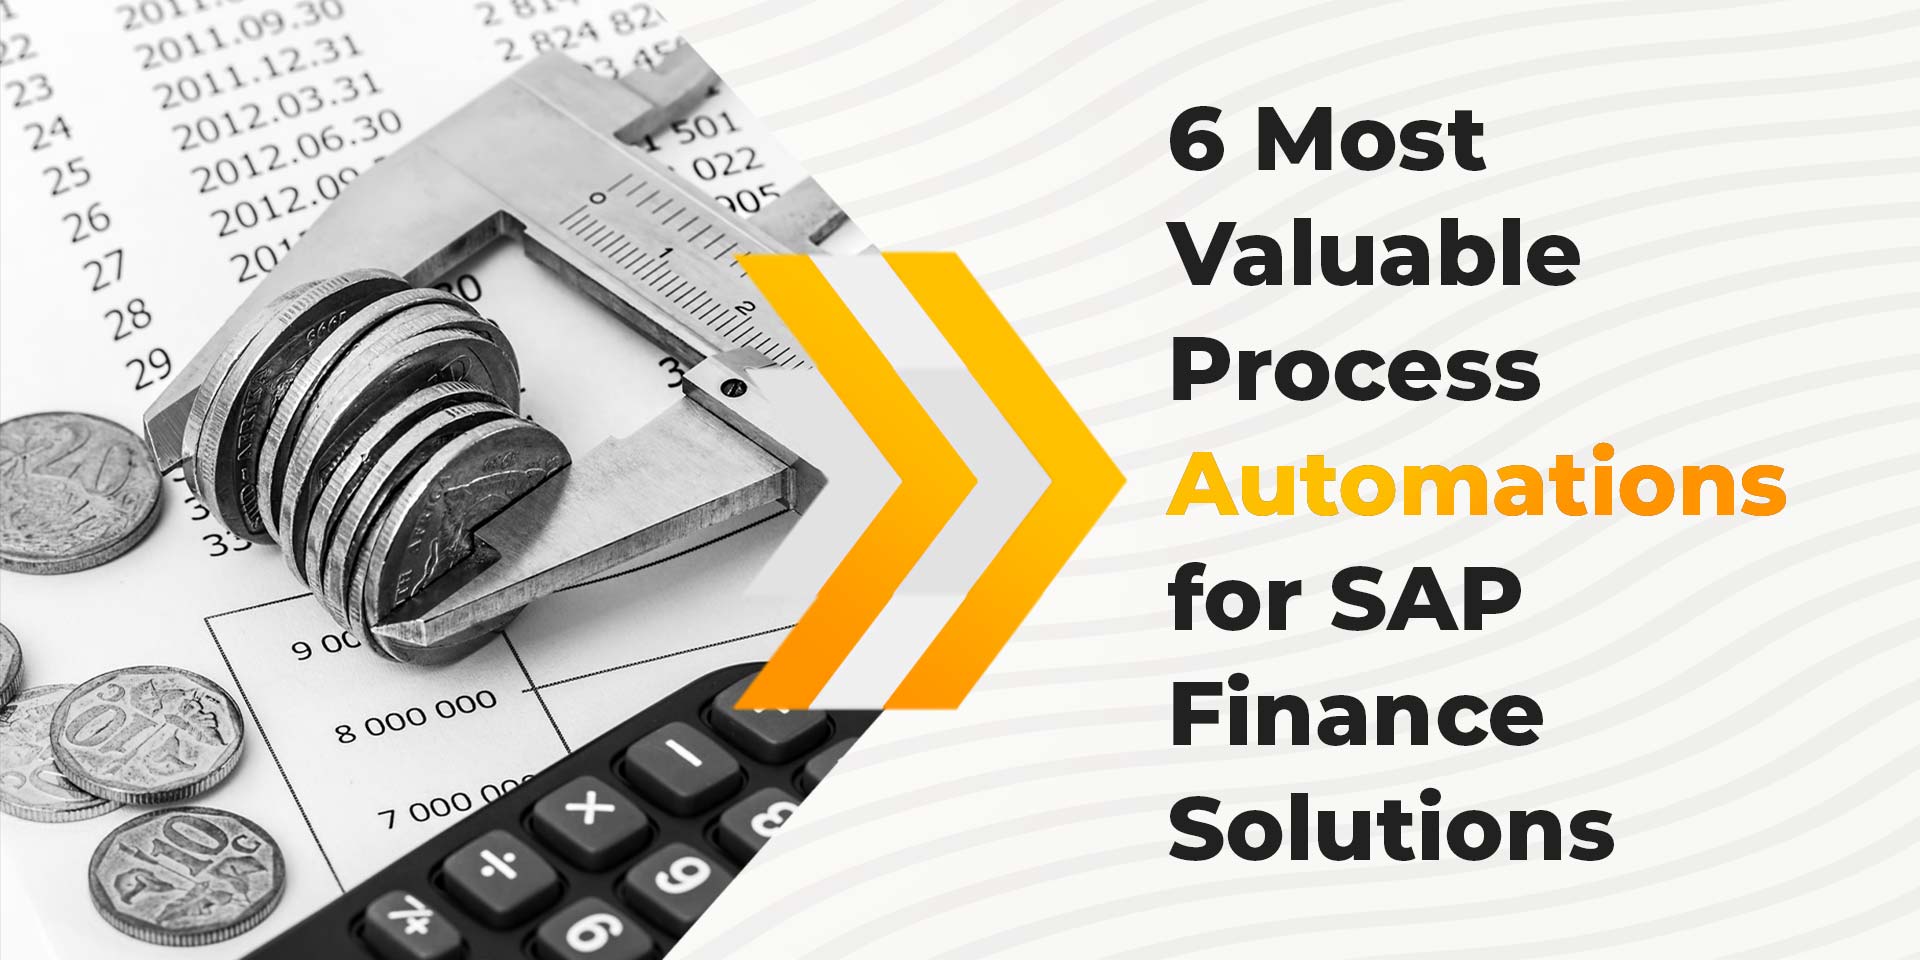 Six Most Valuable Process Automations for SAP Finance Solutions